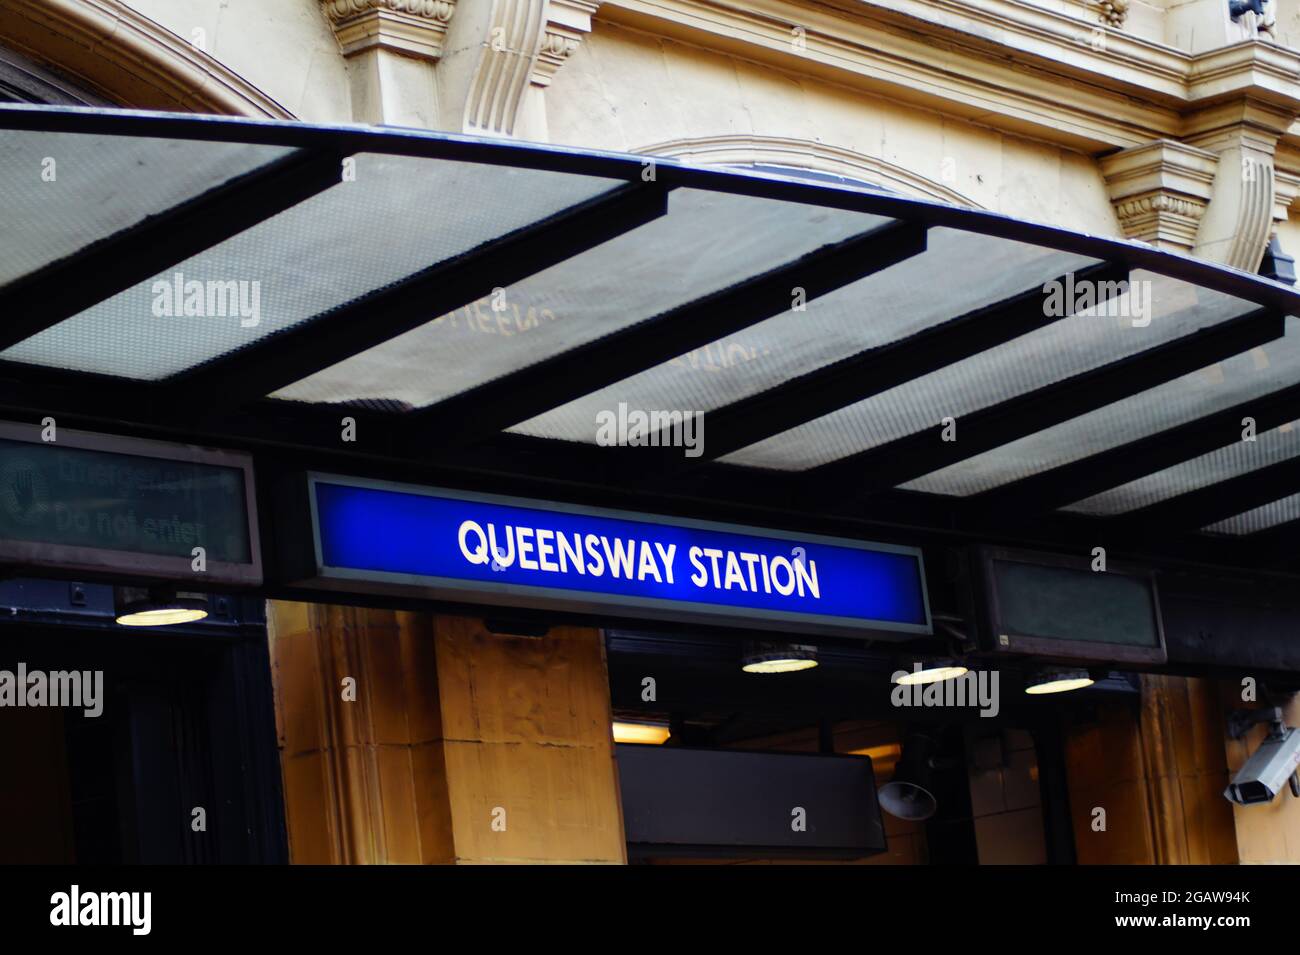 Entrance to Queensway Station in London - UK Stock Photo